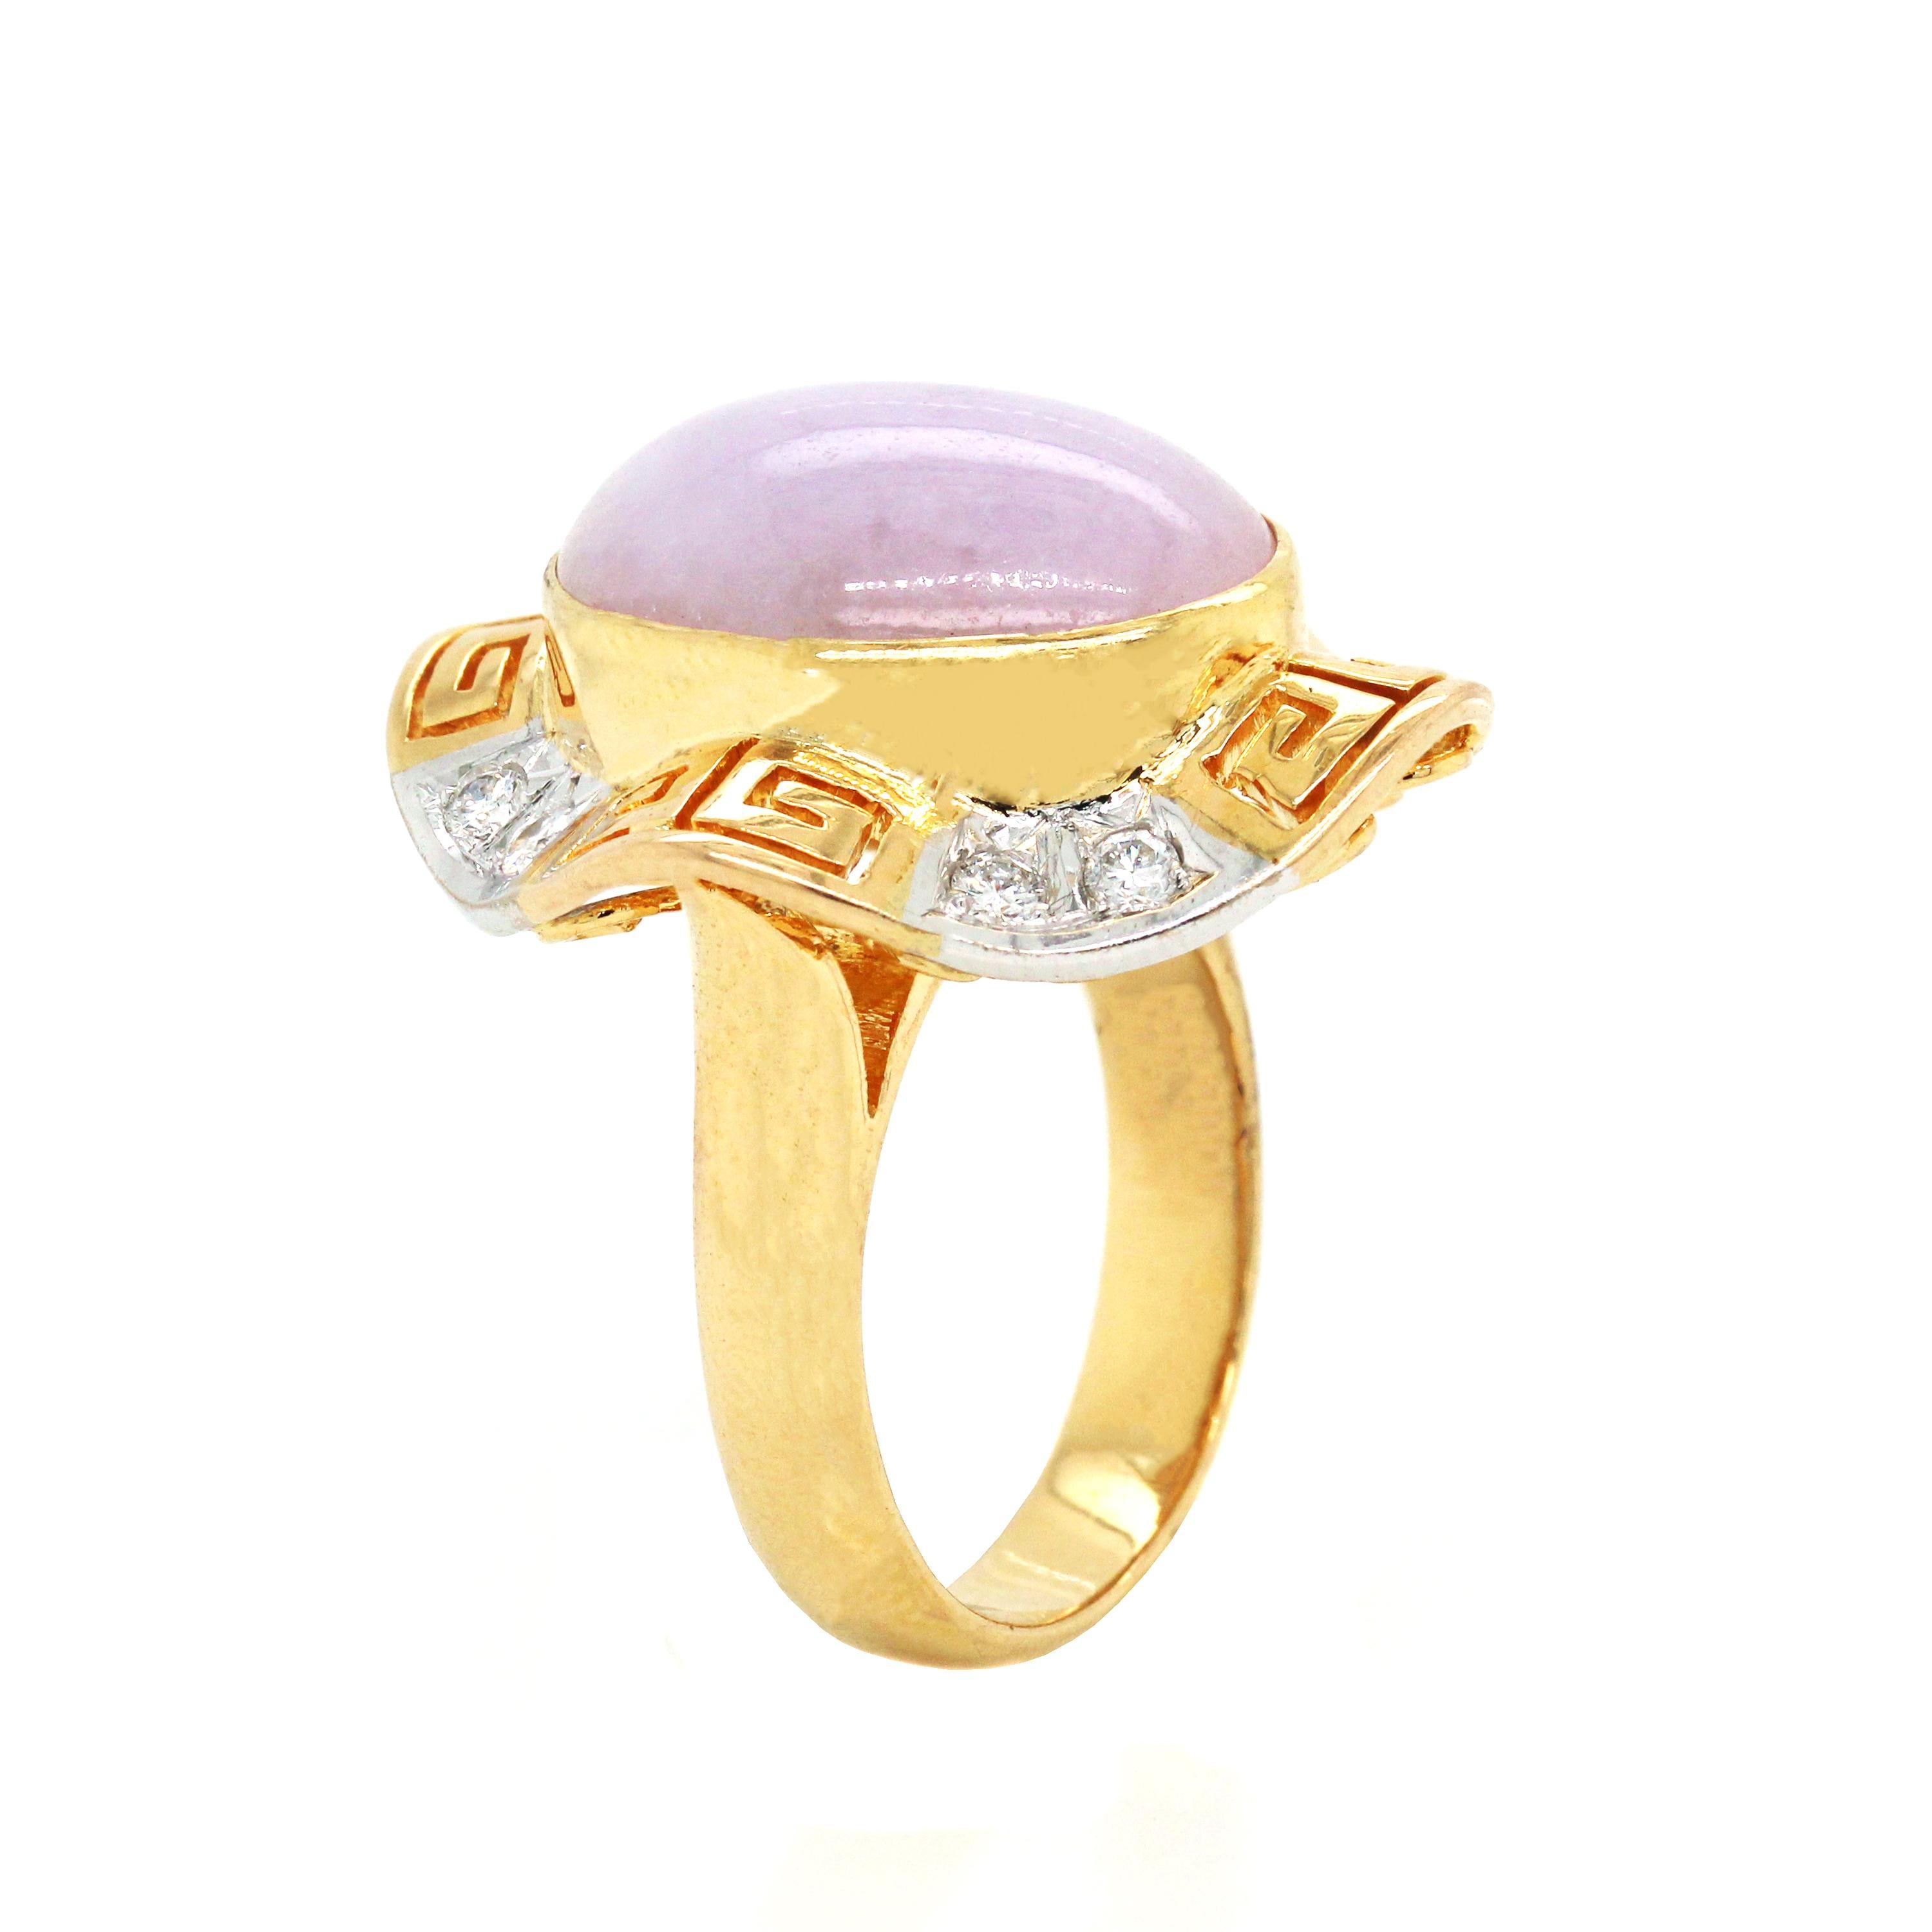 18K Yellow Gold and Diamond Egyptian Style Cocktail Ring with Lavender Jade Center

This unique ring features a Lavender Jade center with touches of Egyptian style and design all throughout

0.40 carat diamonds total weight

0.95 inch face width.